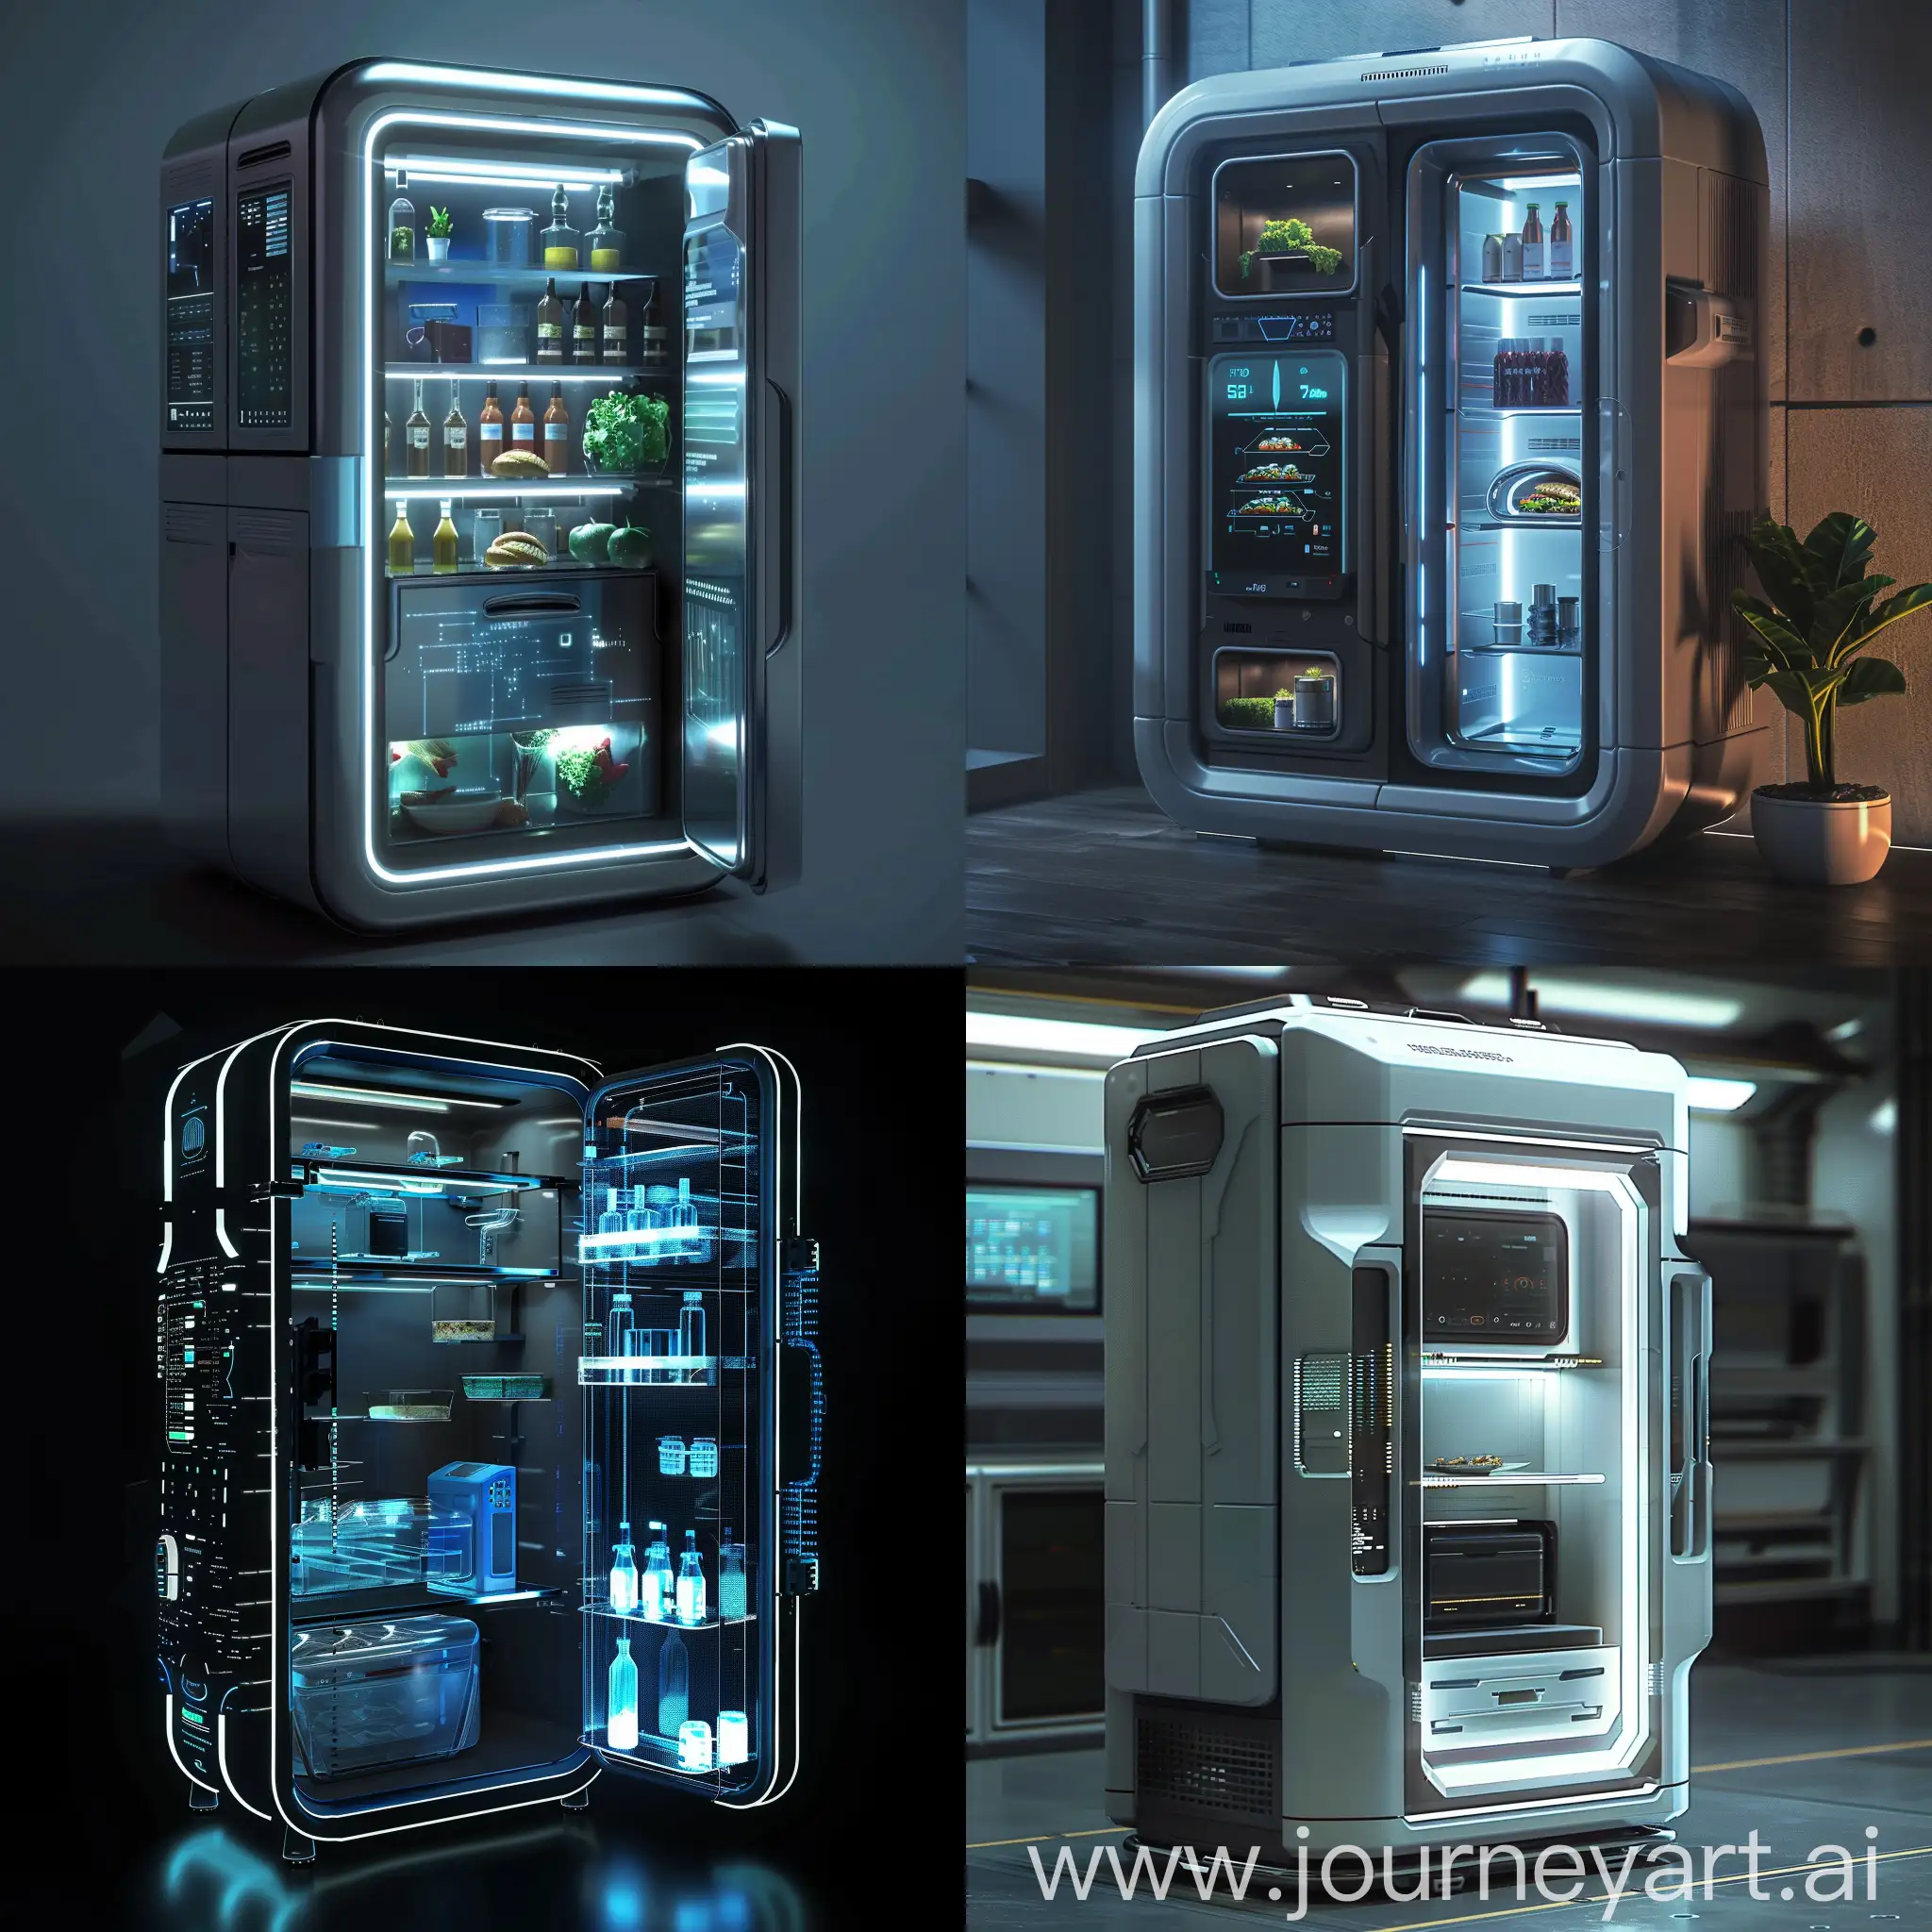 Futuristic-SciFi-Fridge-with-Quantum-Cooling-System-and-Holographic-Display